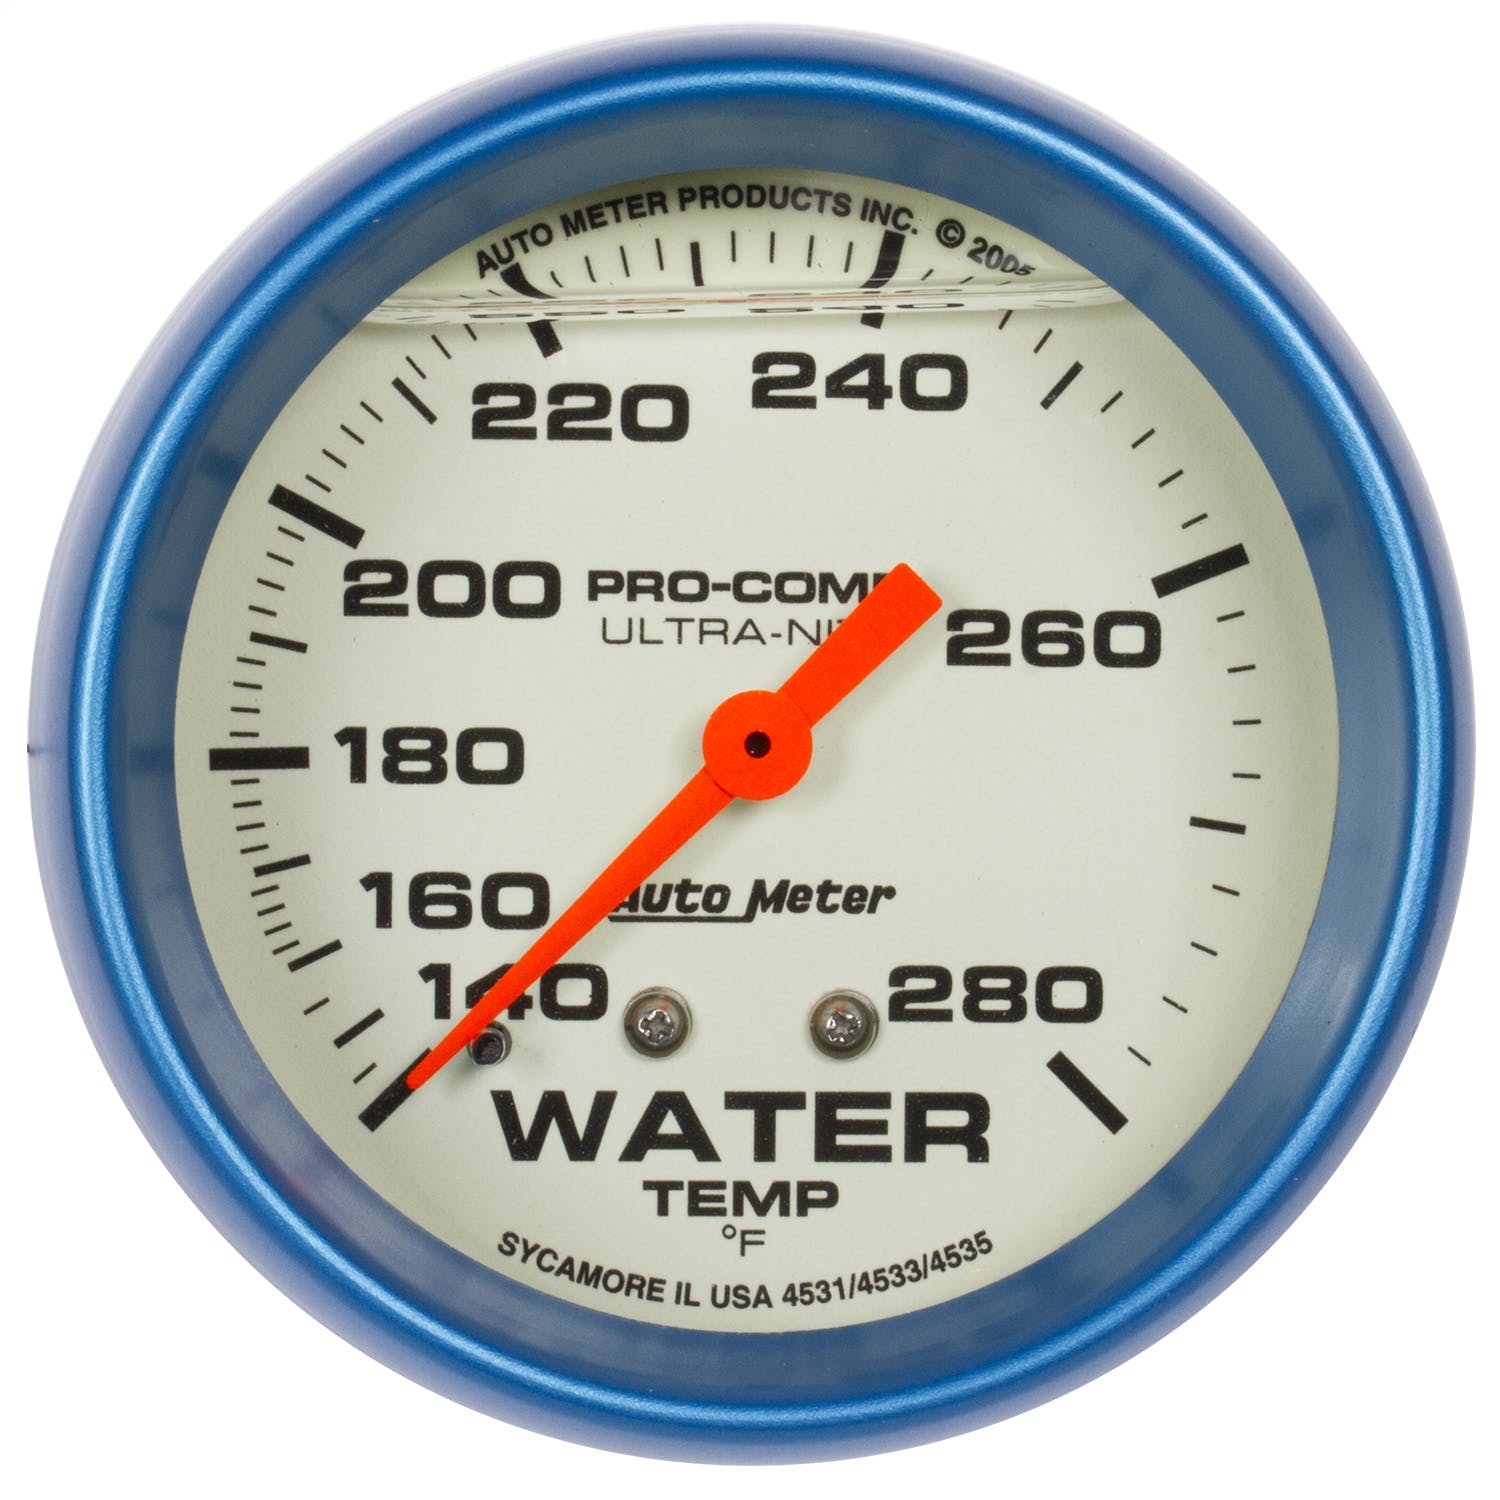 AutoMeter Products 4235 2-5/8 Water Temperature Gauge, 140- 280° F, LFG, Ultra-Nite